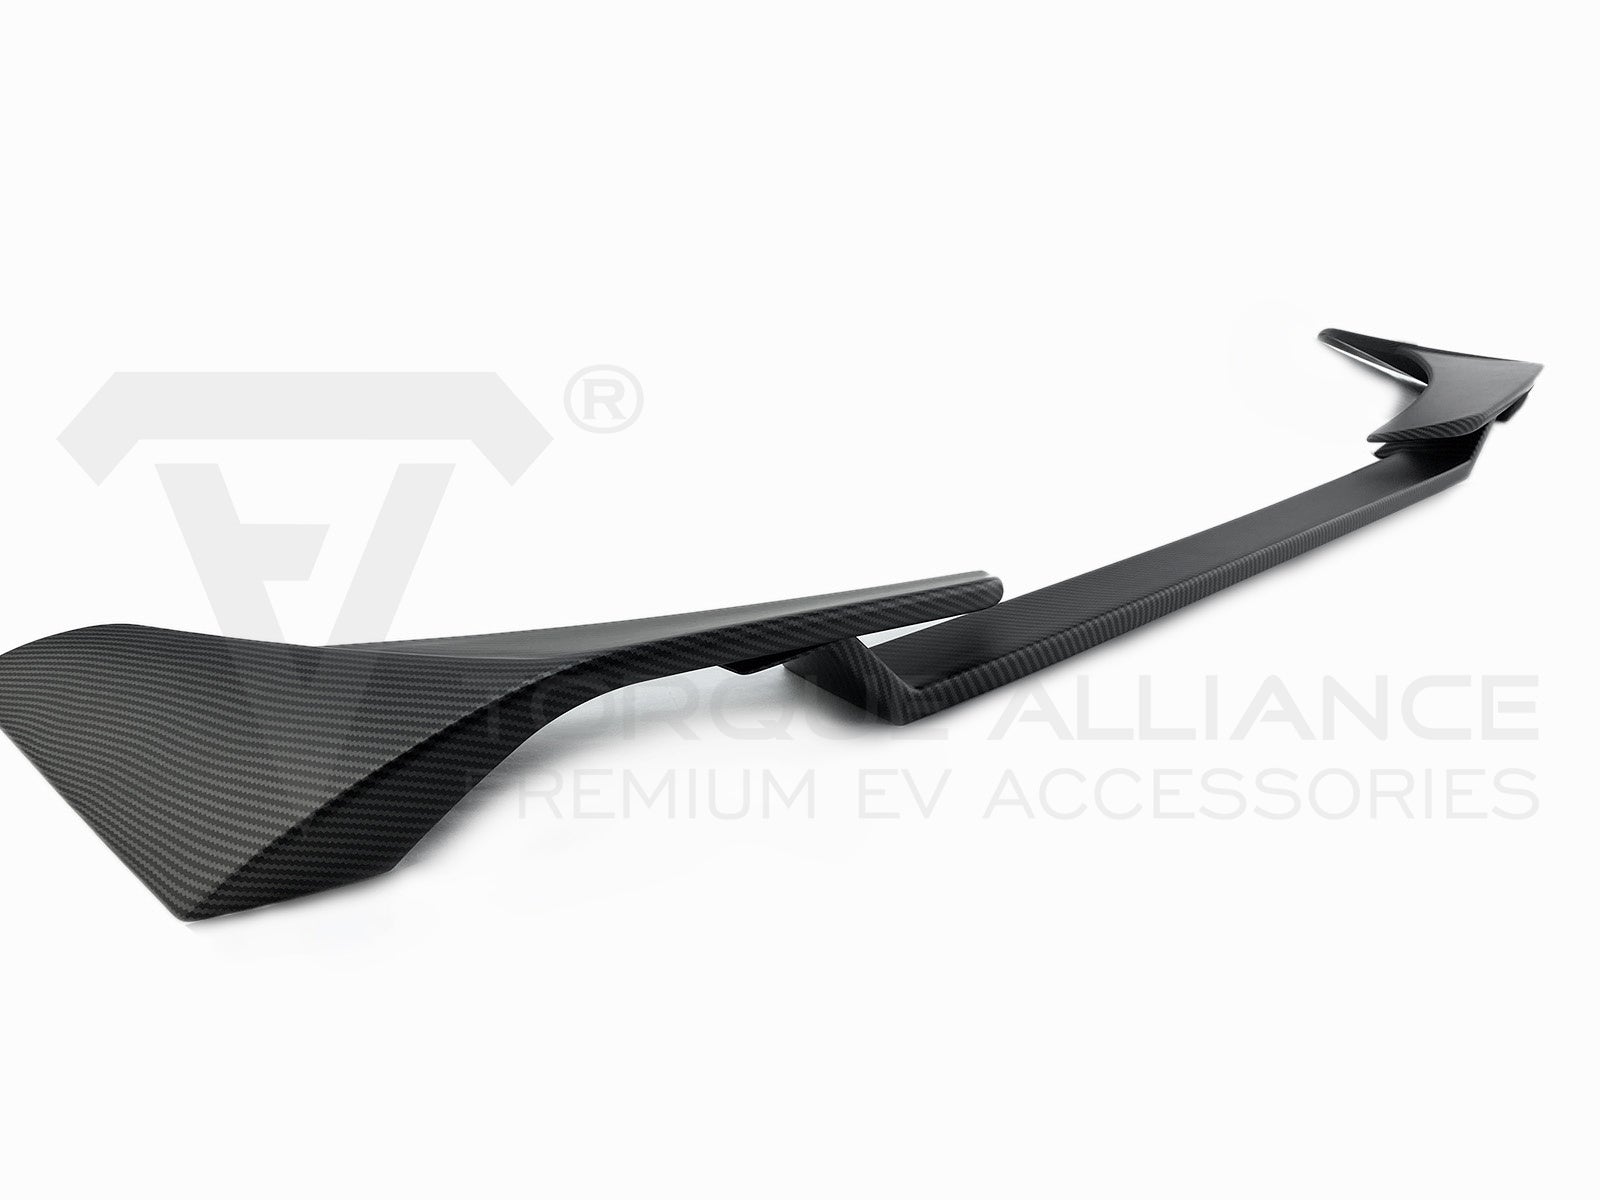 Ford Mustang Mach-e: Tail Spoiler - GT Version (ABS + Coating) - Torque Alliance